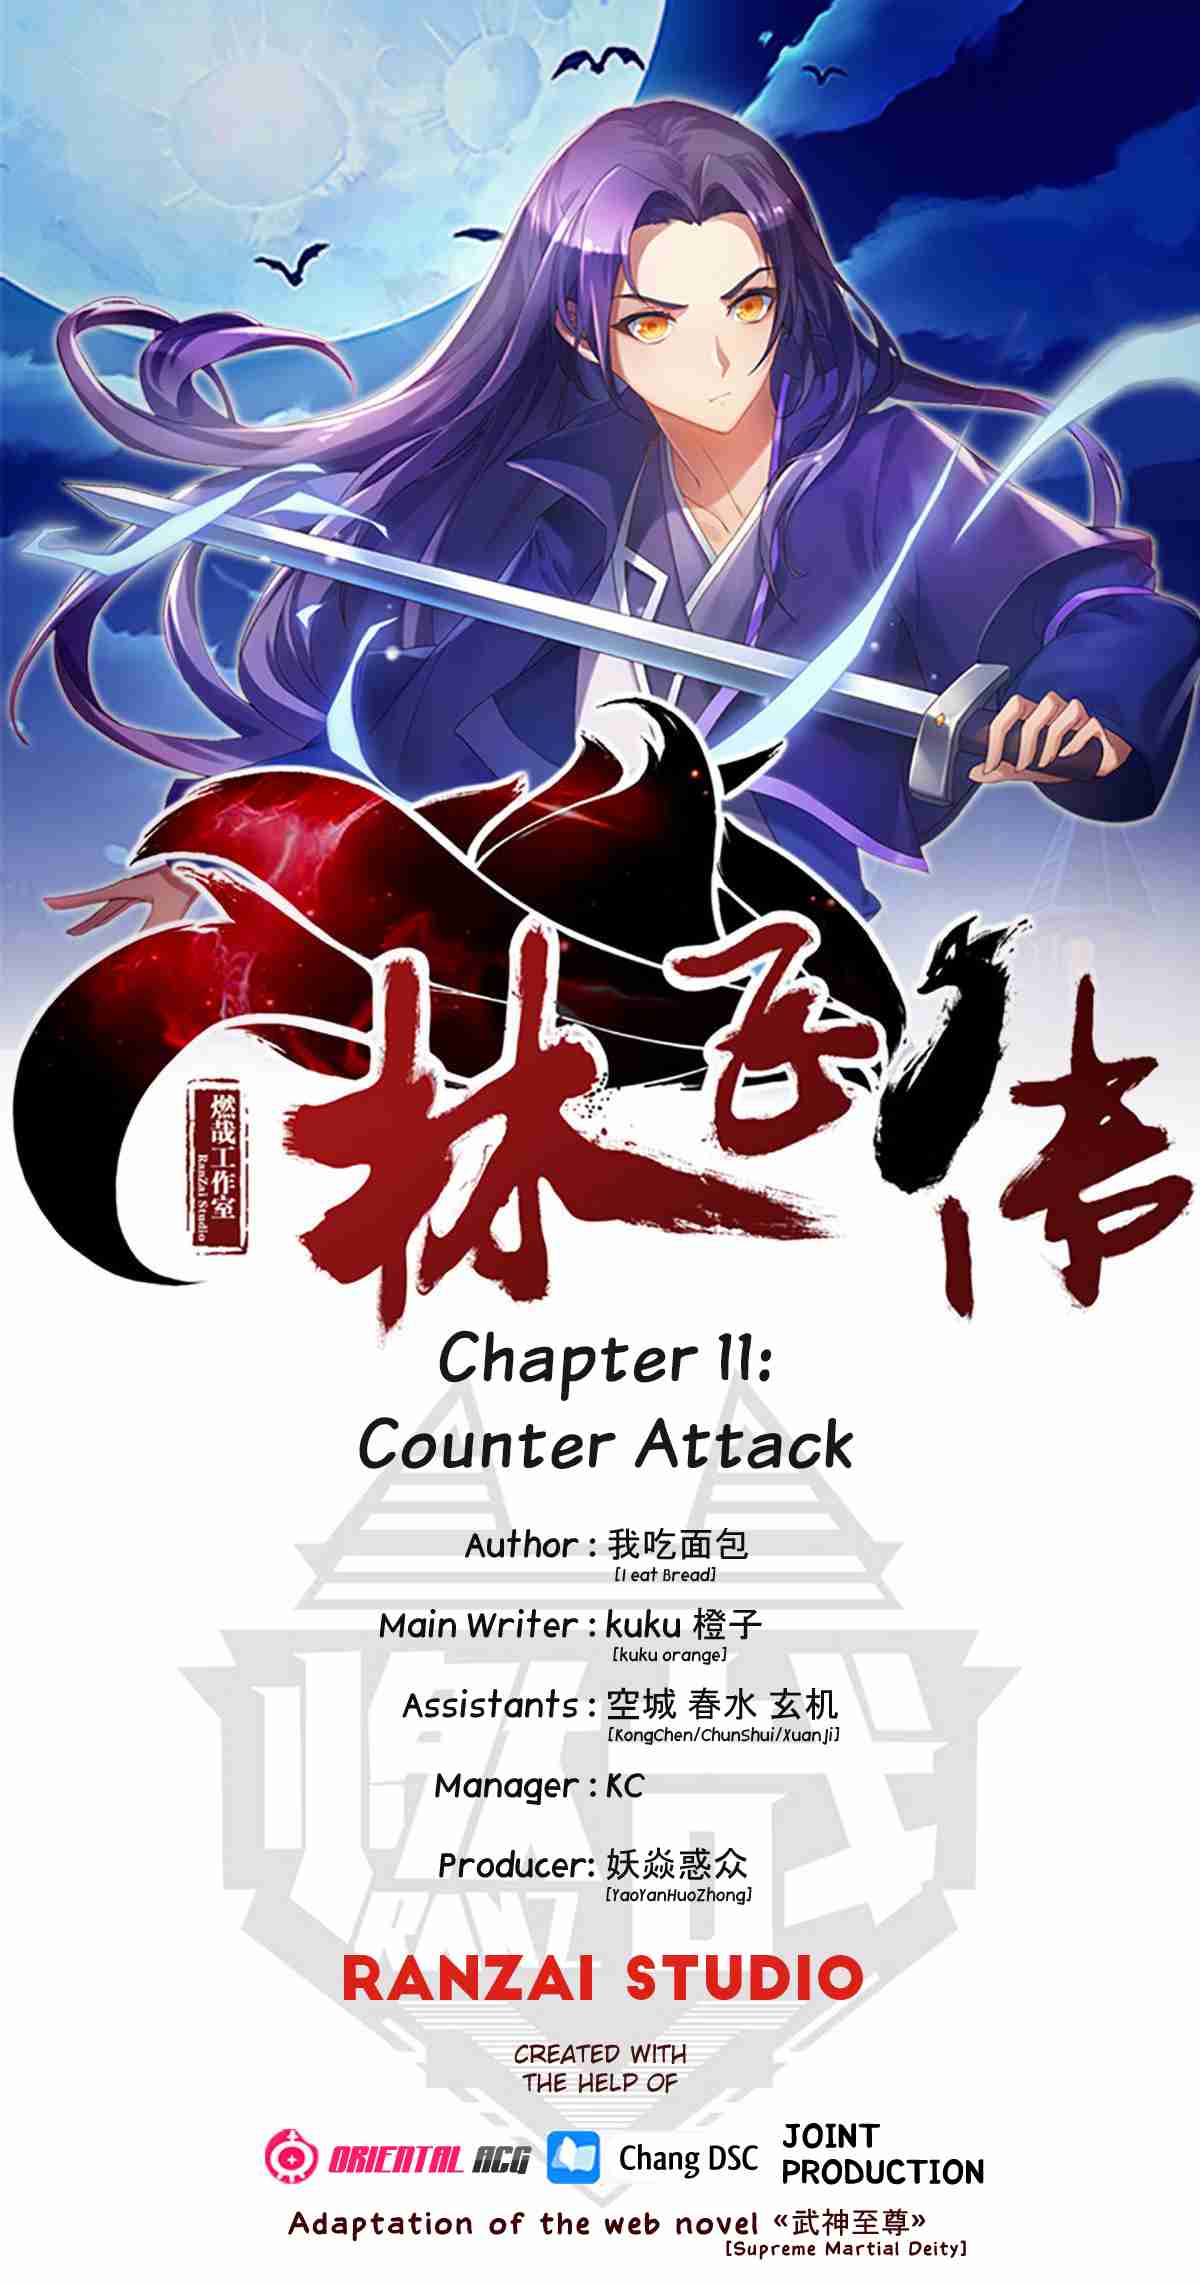 Lin Fei Chronicles Ch. 11 Counter Attack